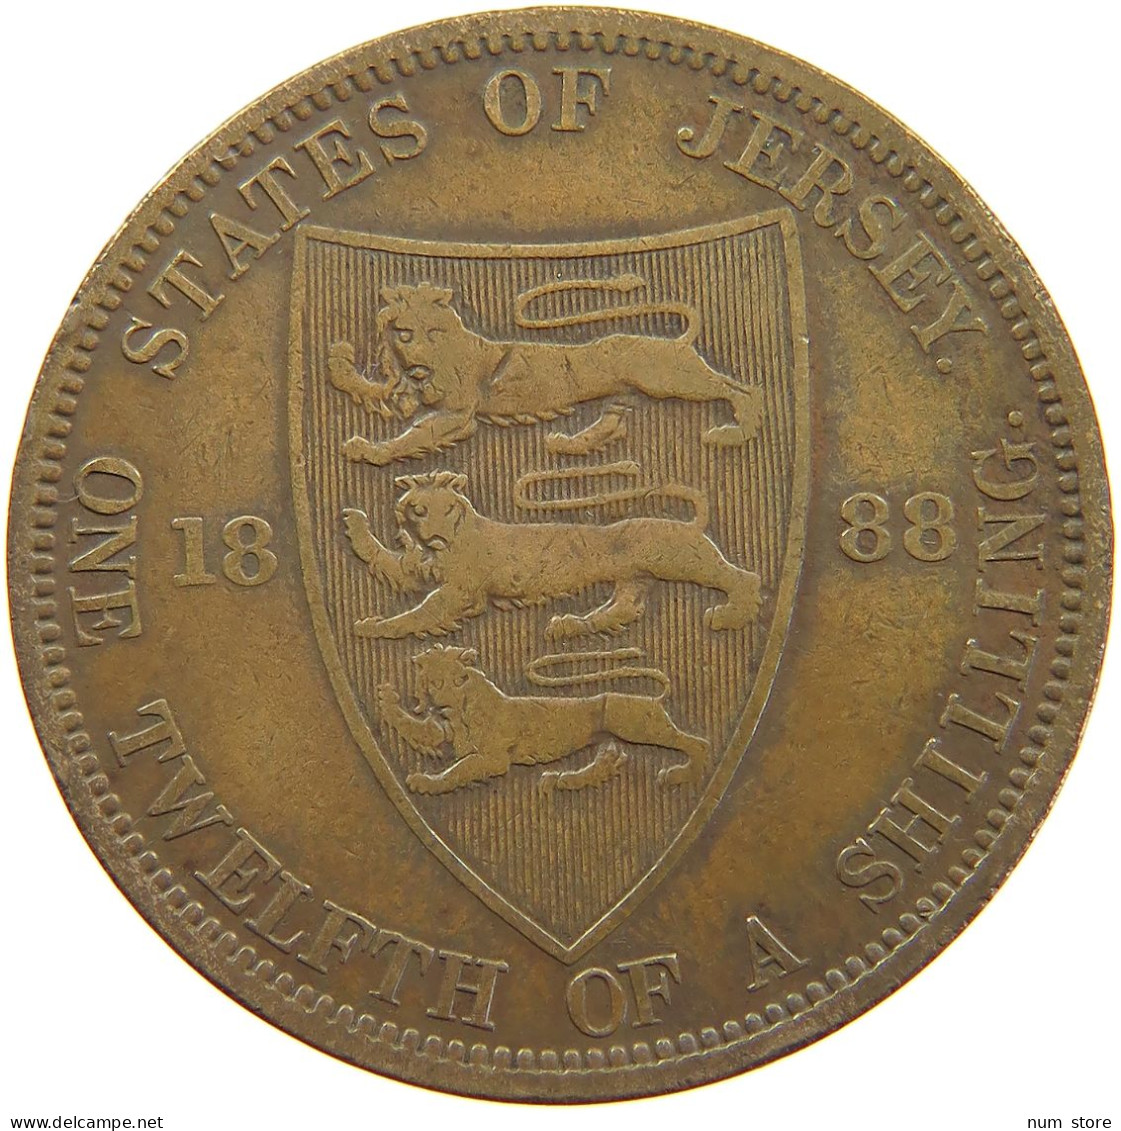 JERSEY 1/12 SHILLING 1888 Victoria 1837-1901 #a062 0291 - Jersey